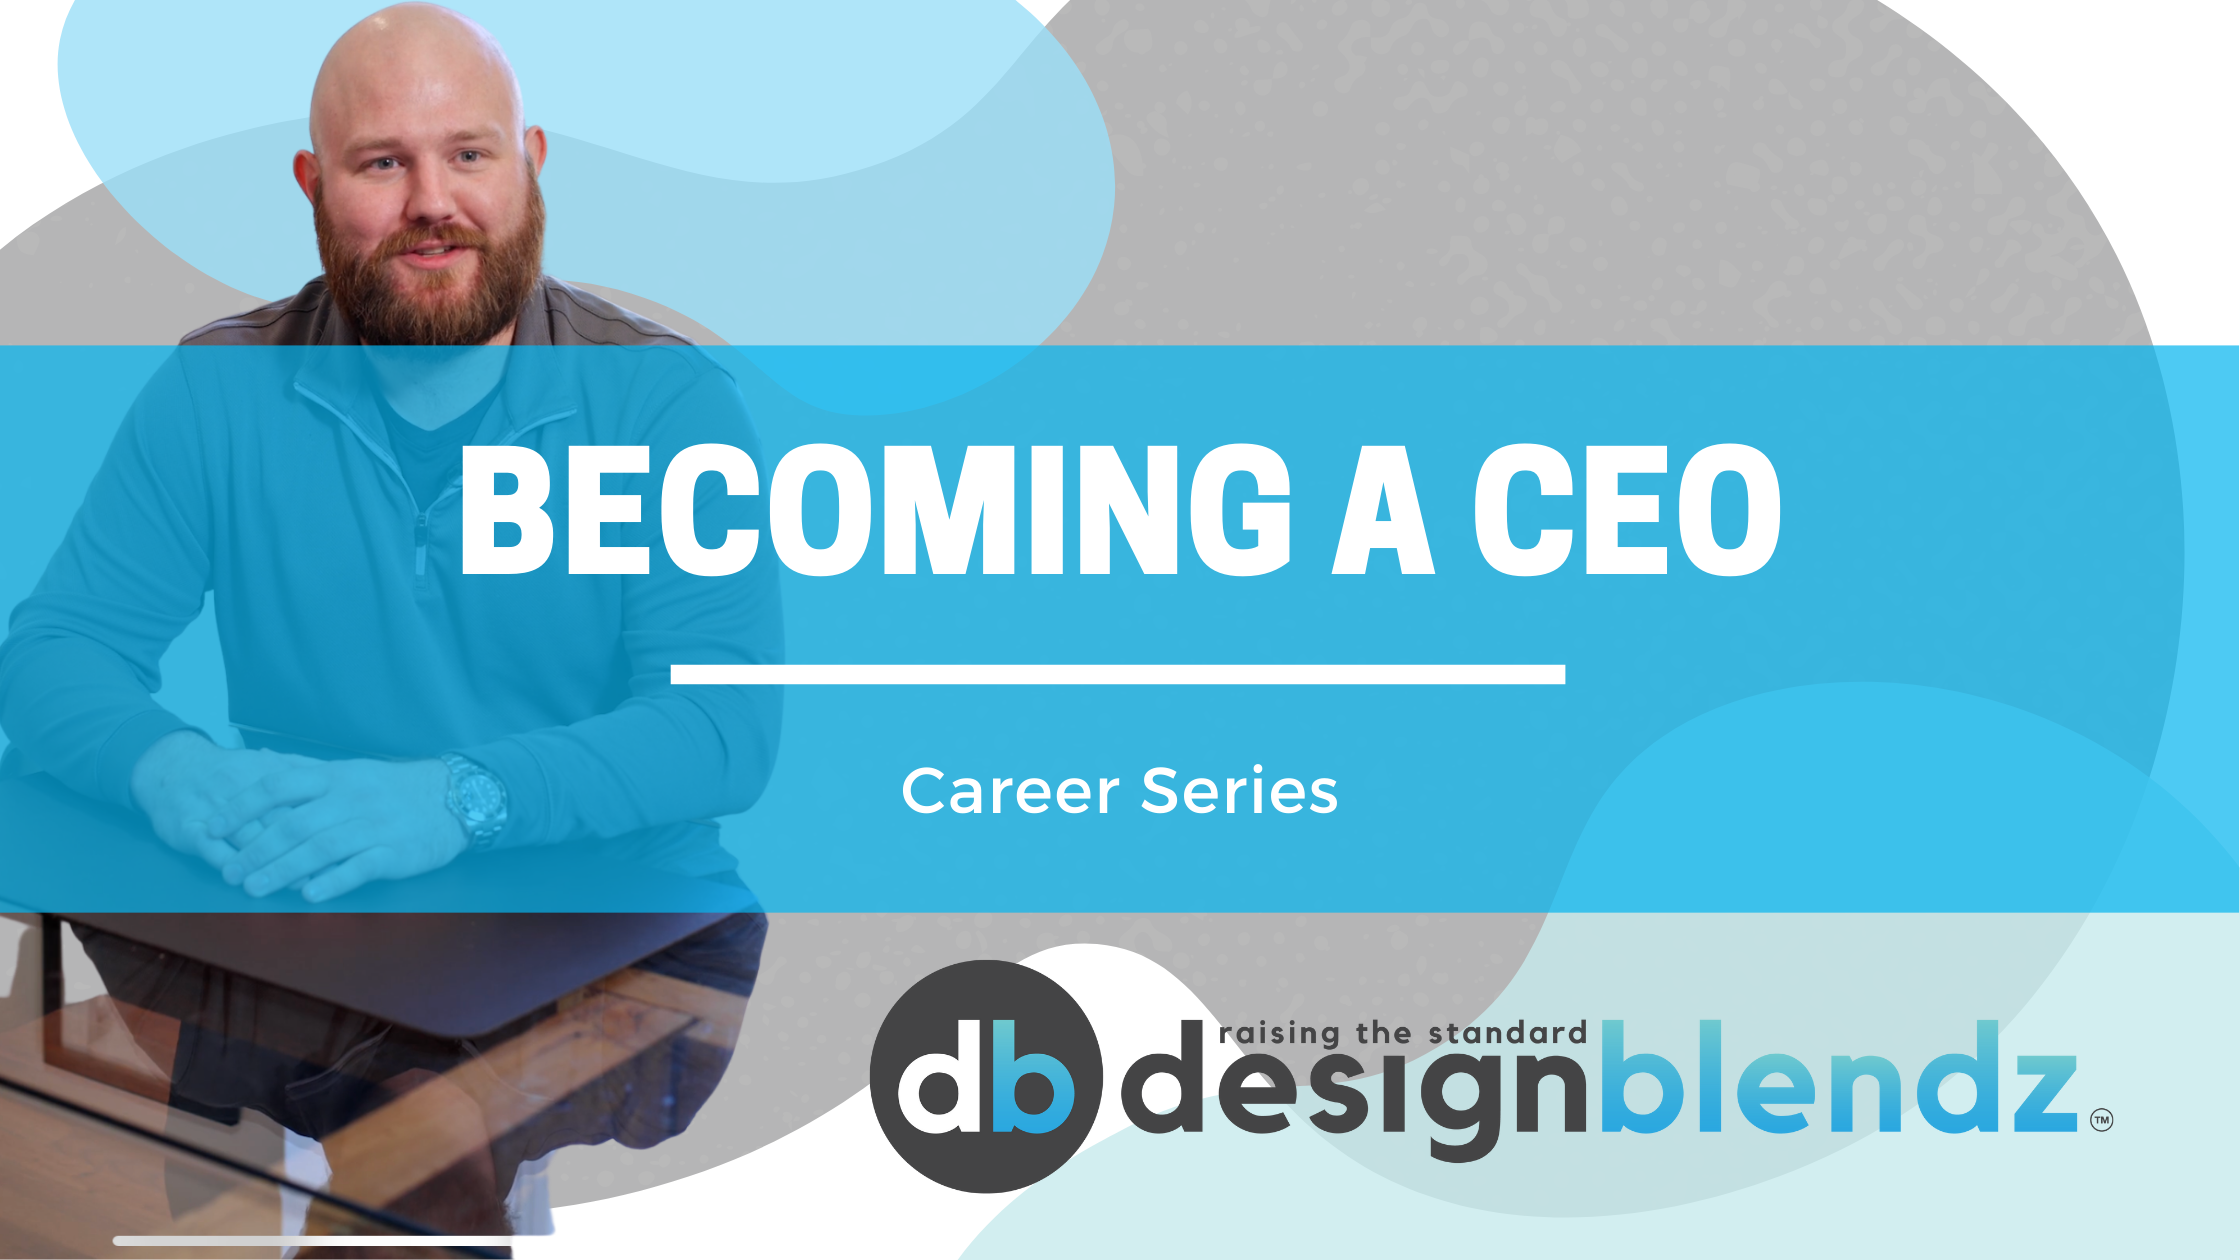 Career Series: Becoming a CEO